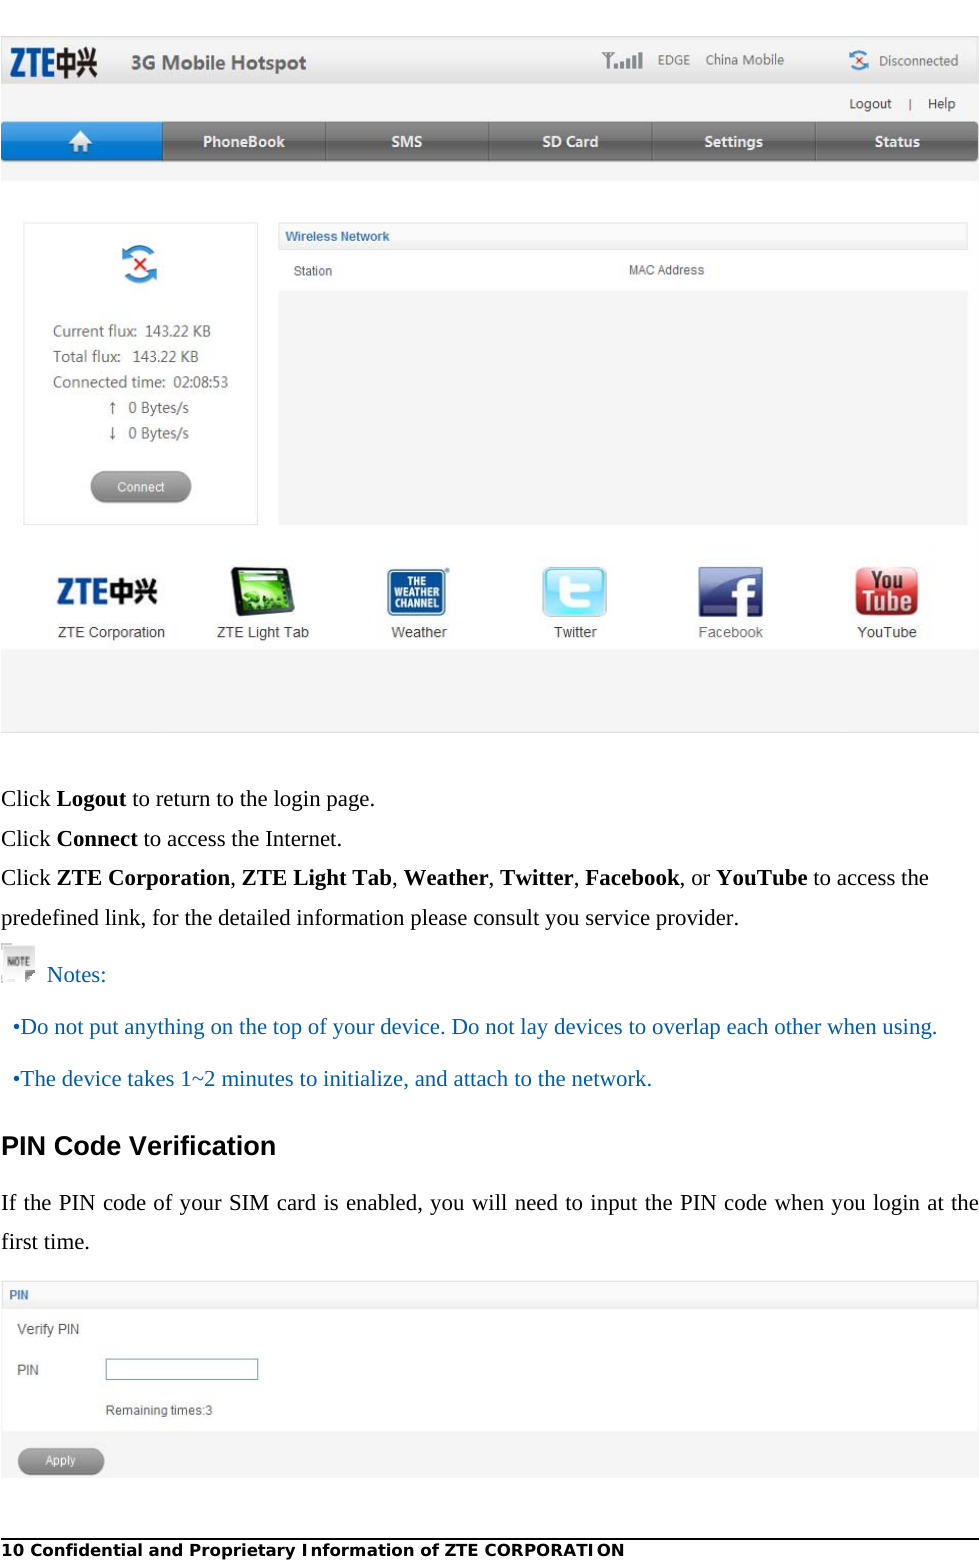  10 Confidential and Proprietary Information of ZTE CORPORATION  Click Logout to return to the login page. Click Connect to access the Internet. Click ZTE Corporation, ZTE Light Tab, Weather, Twitter, Facebook, or YouTube to access the predefined link, for the detailed information please consult you service provider.  Notes: •Do not put anything on the top of your device. Do not lay devices to overlap each other when using. •The device takes 1~2 minutes to initialize, and attach to the network. PIN Code Verification If the PIN code of your SIM card is enabled, you will need to input the PIN code when you login at the first time.  